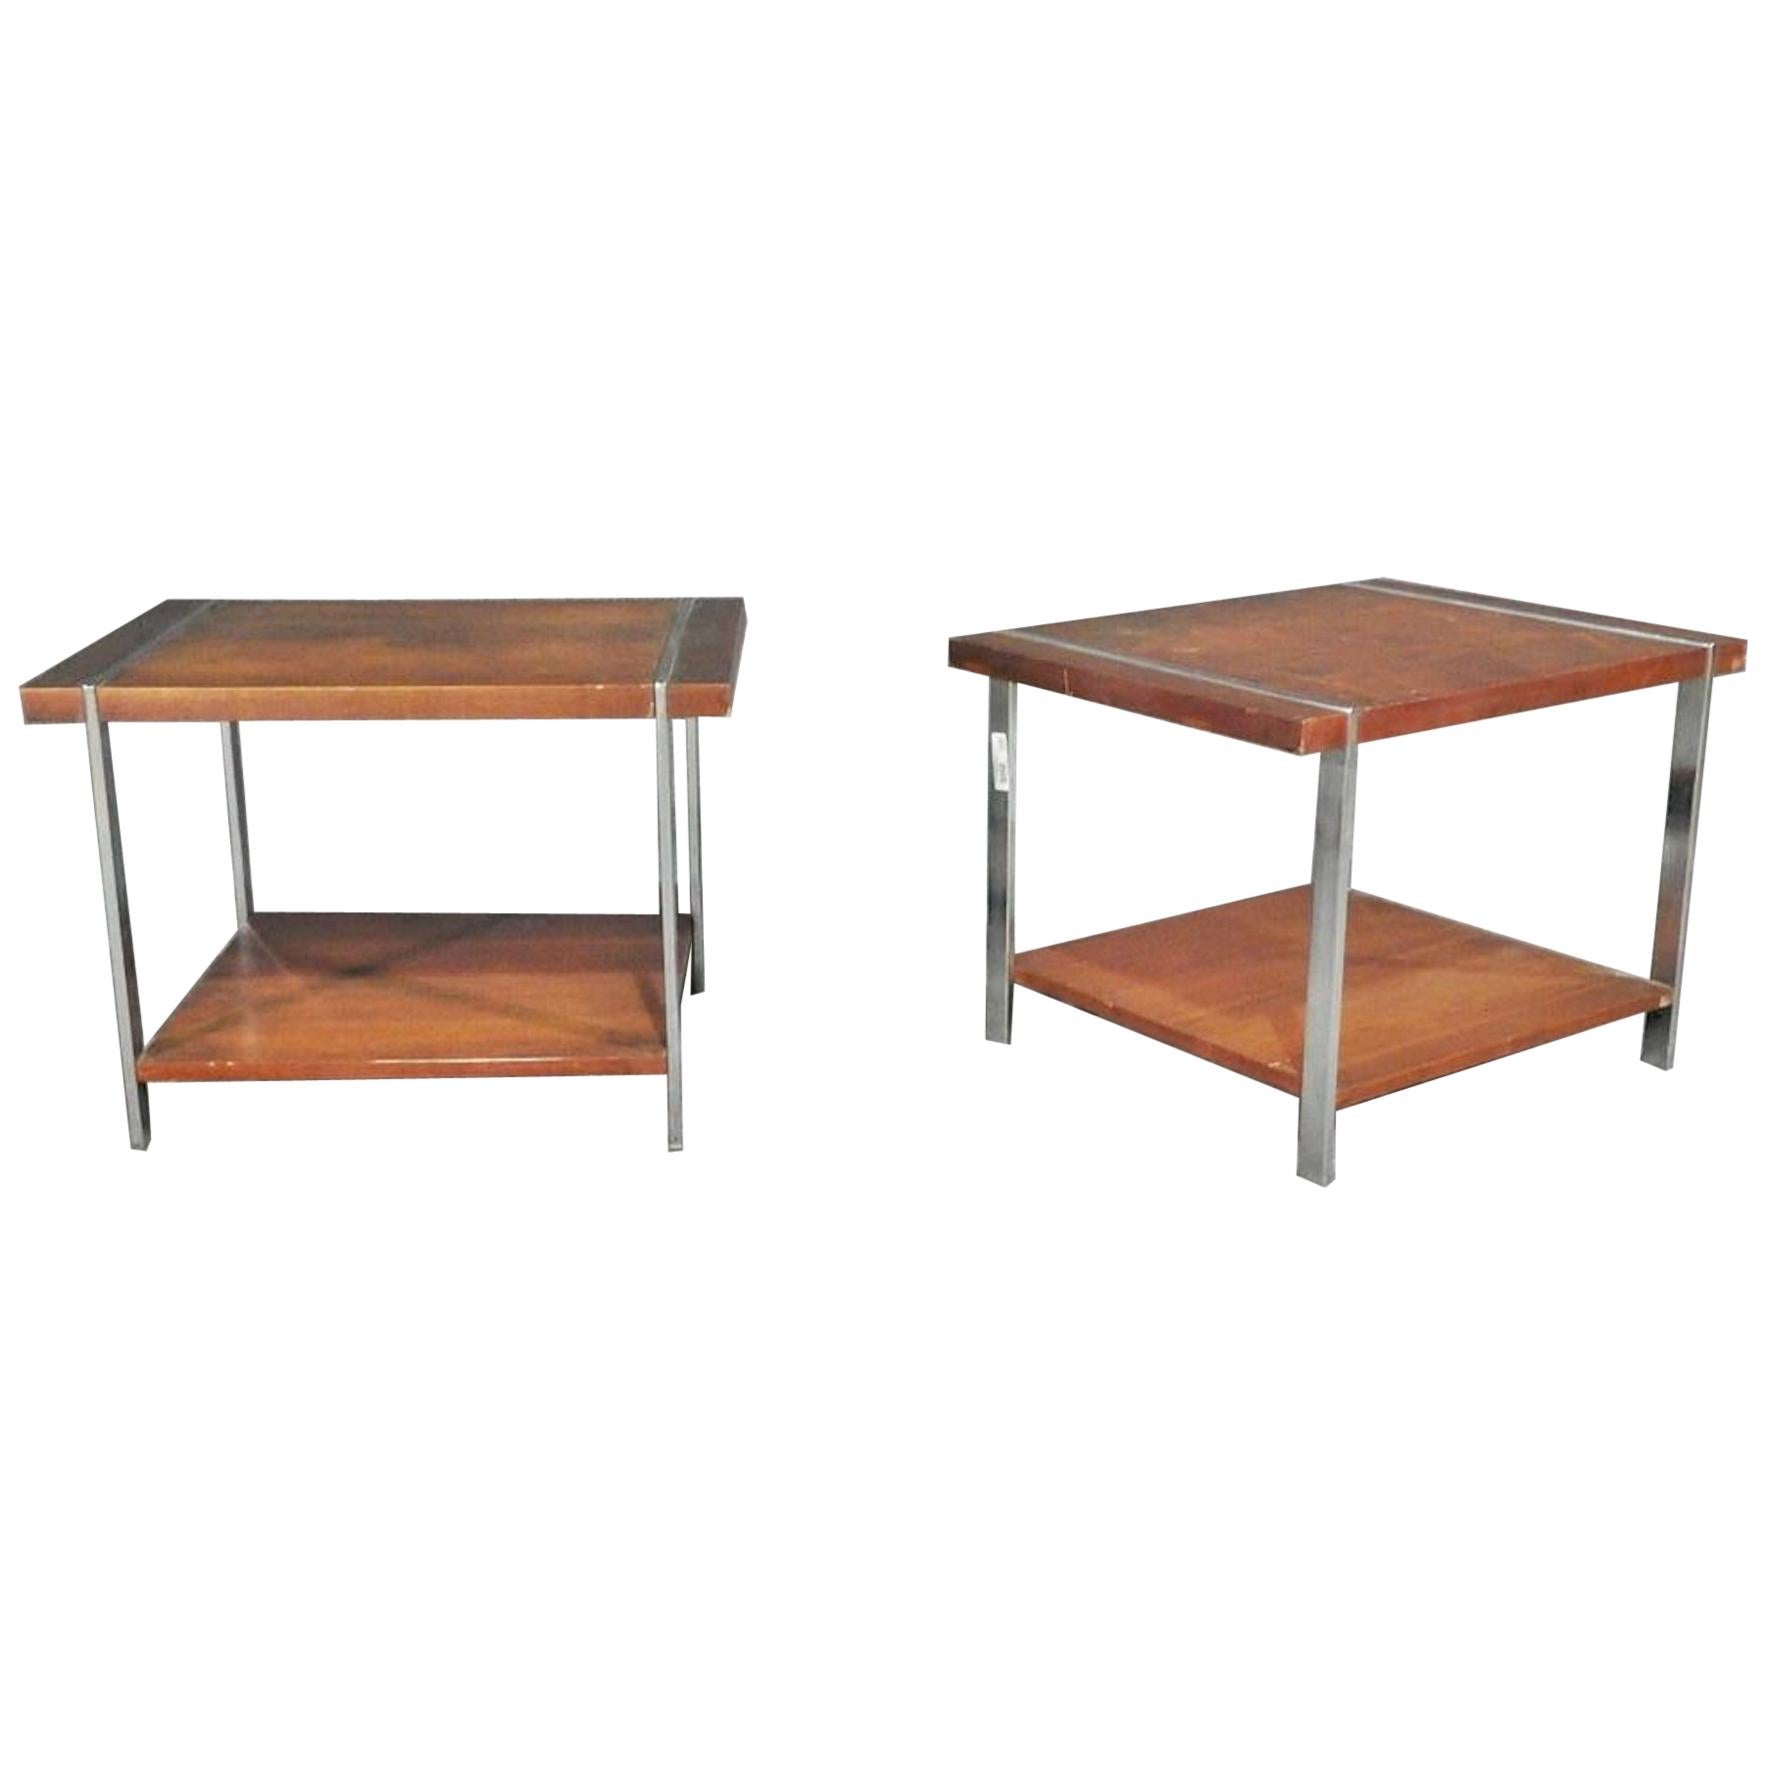 Chrome frame walnut tables with bottom shelf designed by Lane.
(Please confirm item location - NY or NJ - with dealer).
  